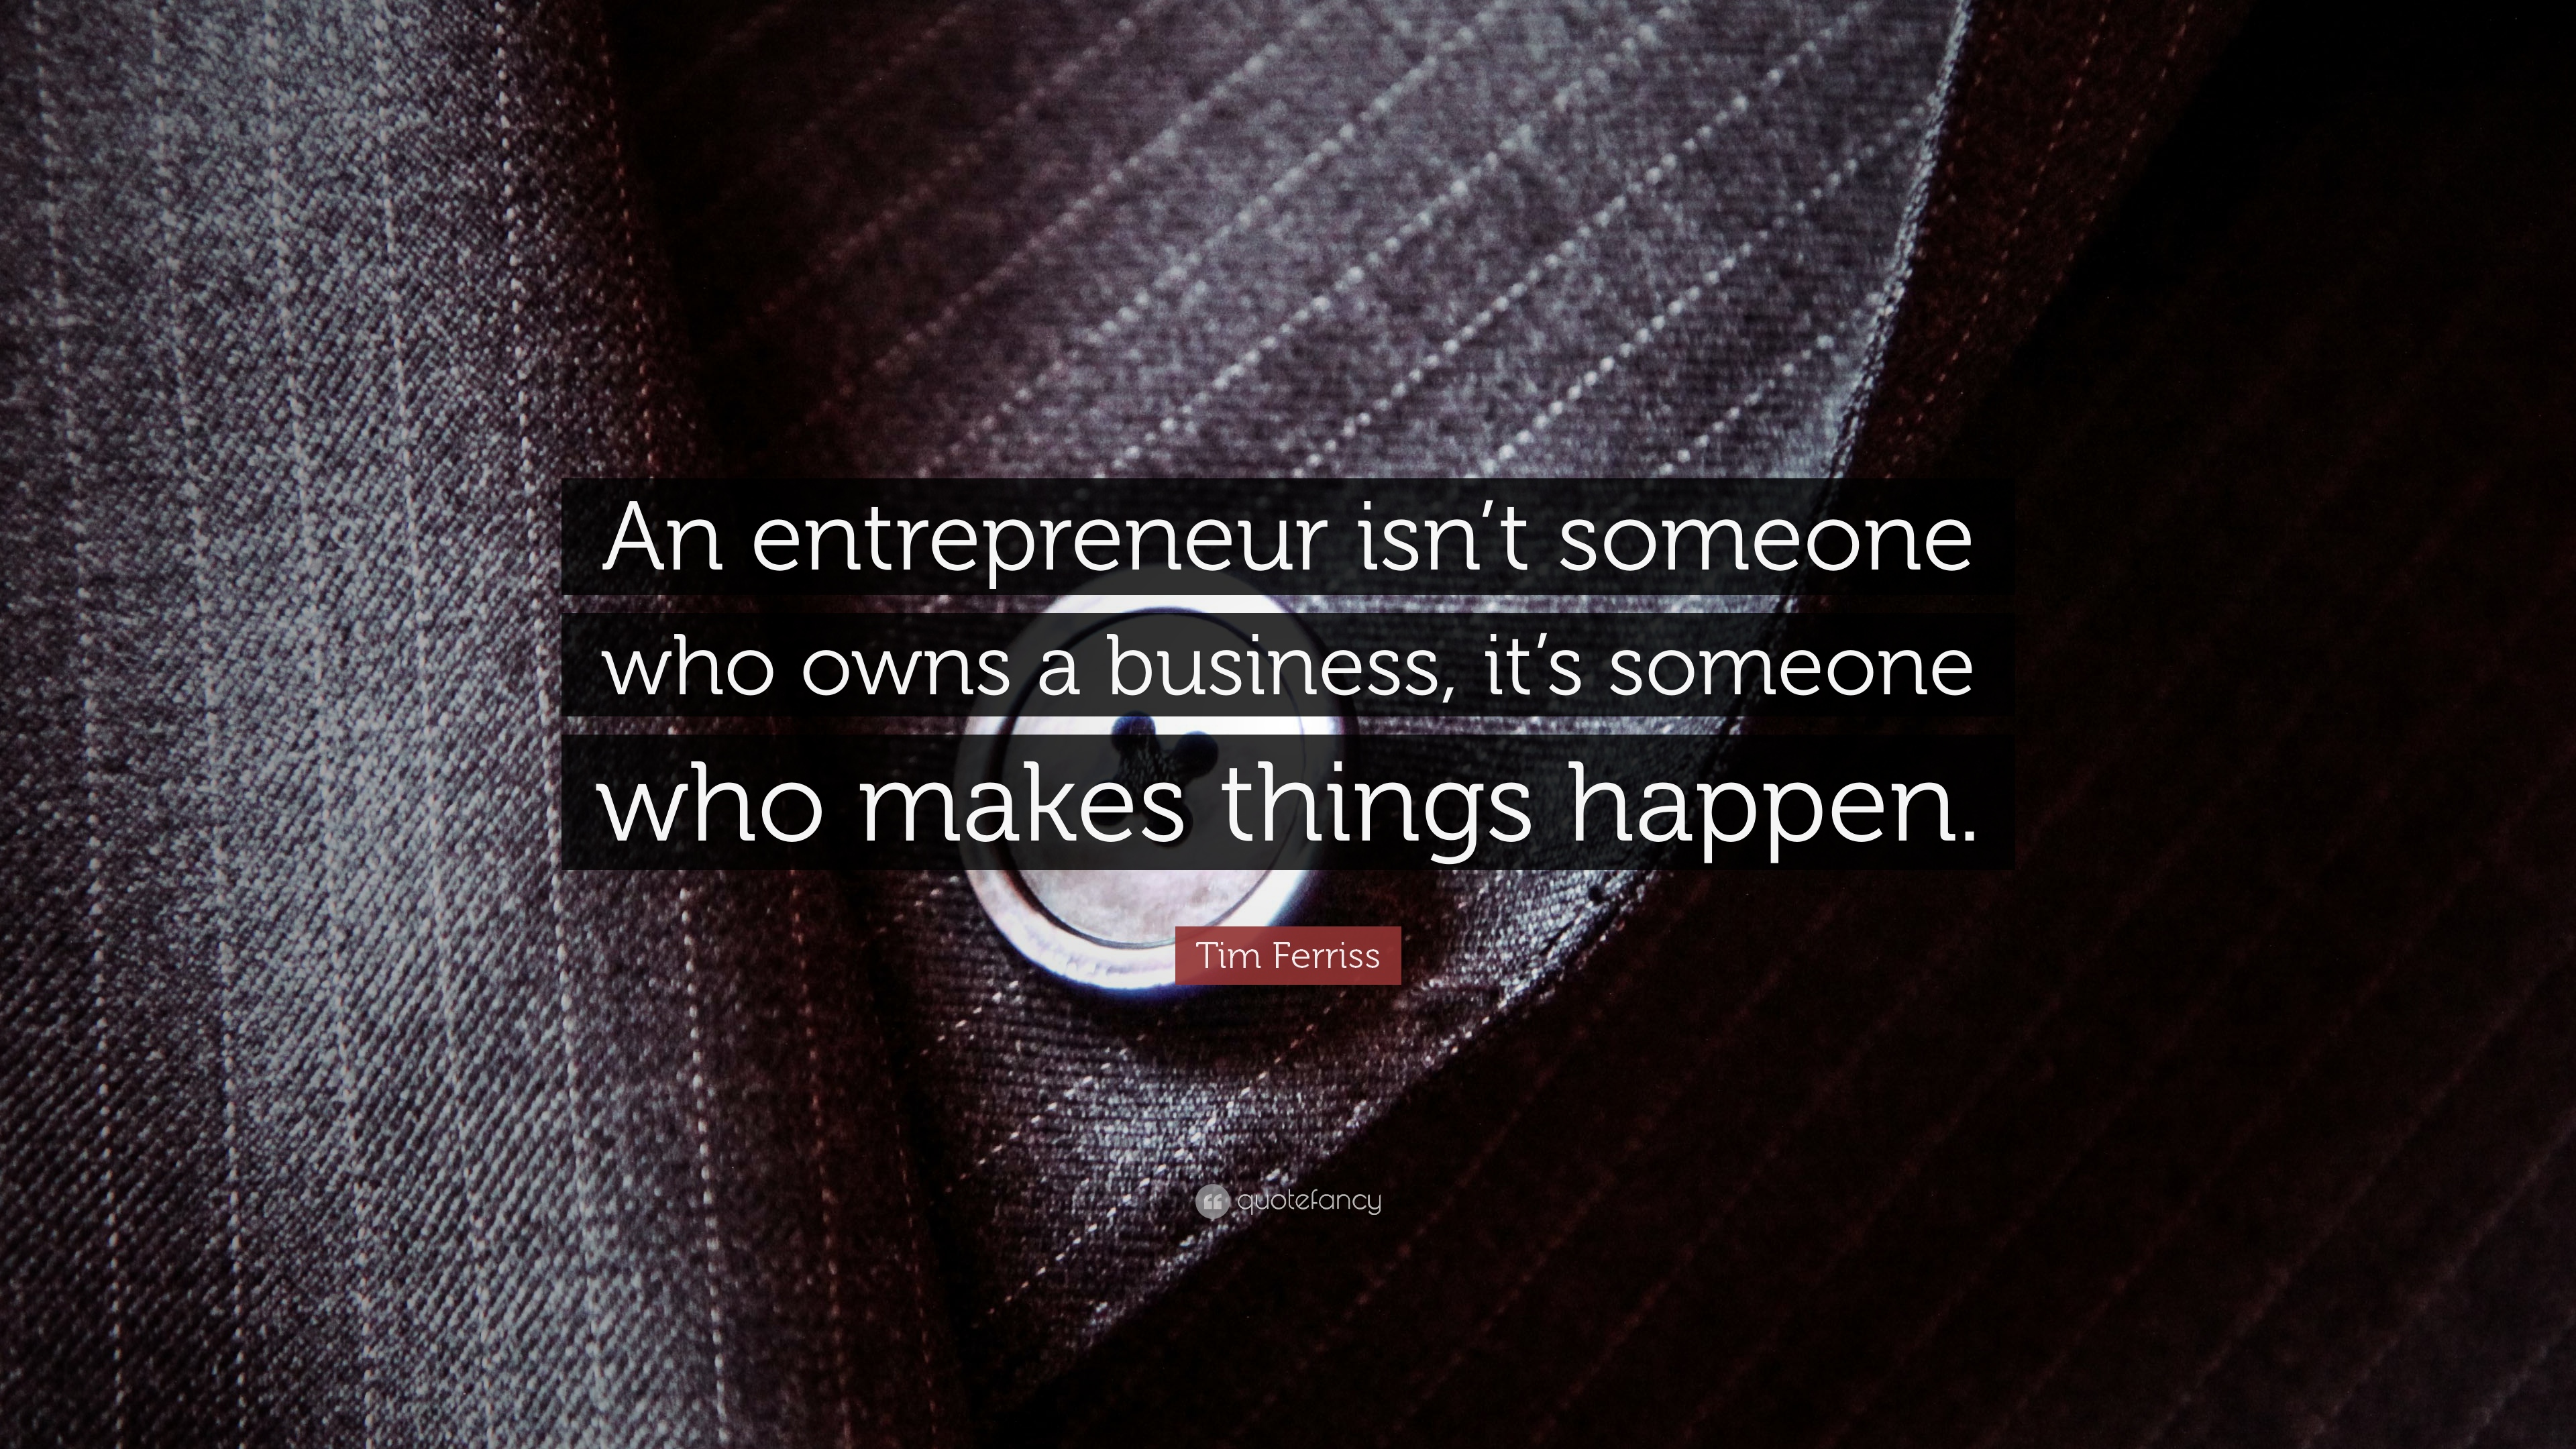 Inspirational Entrepreneurship Quotes - Man Who Does More Than He - HD Wallpaper 